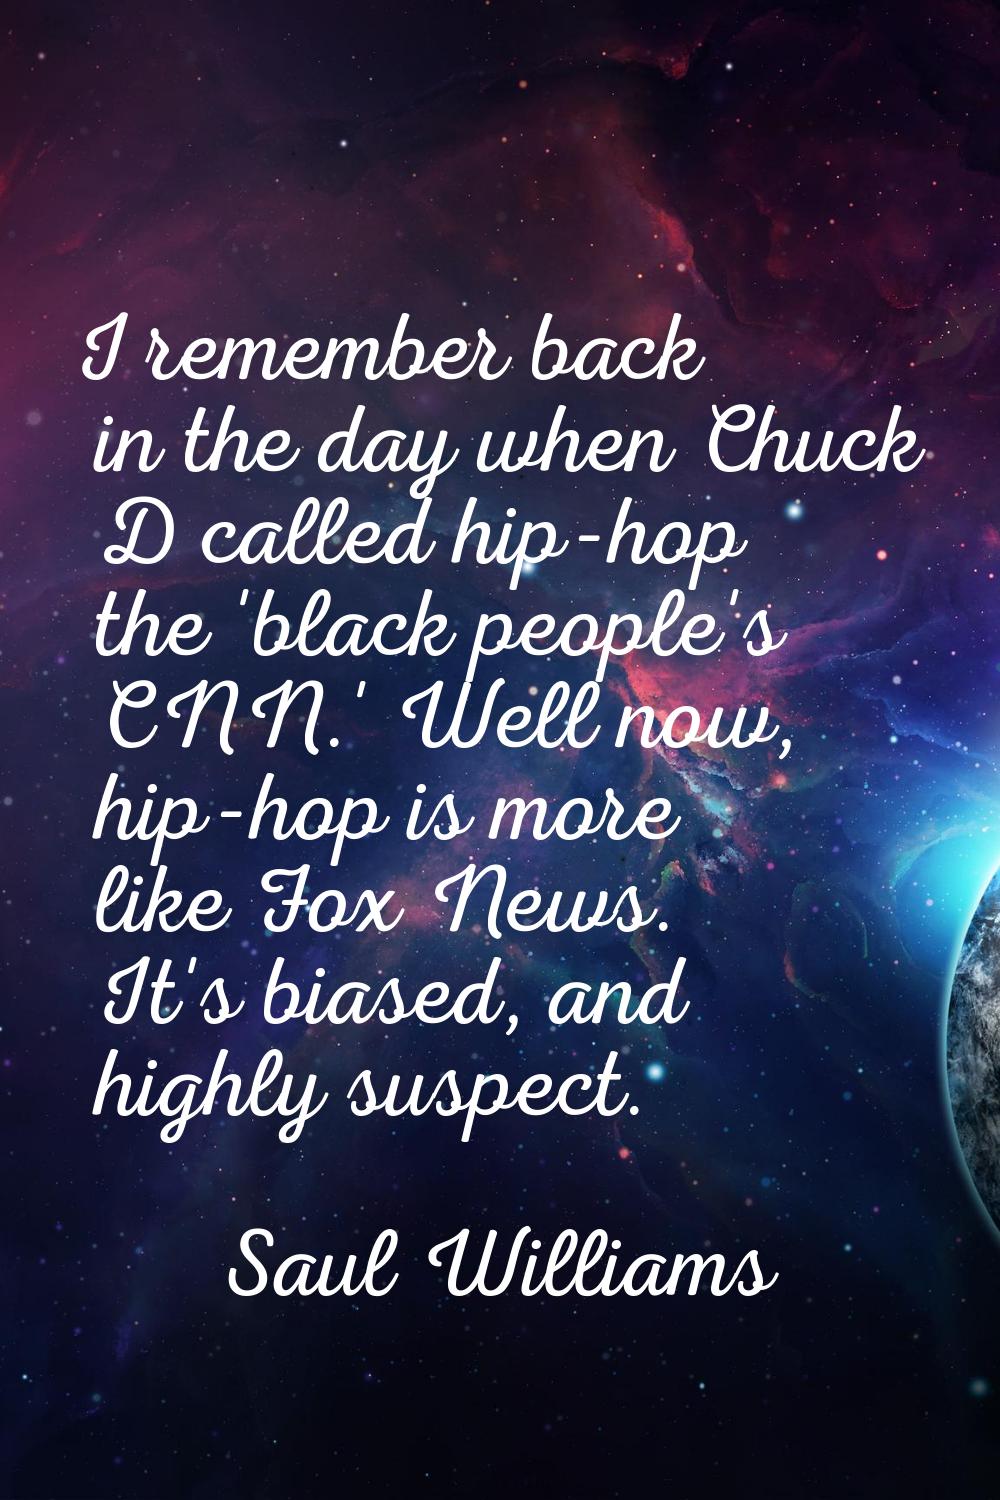 I remember back in the day when Chuck D called hip-hop the 'black people's CNN.' Well now, hip-hop 